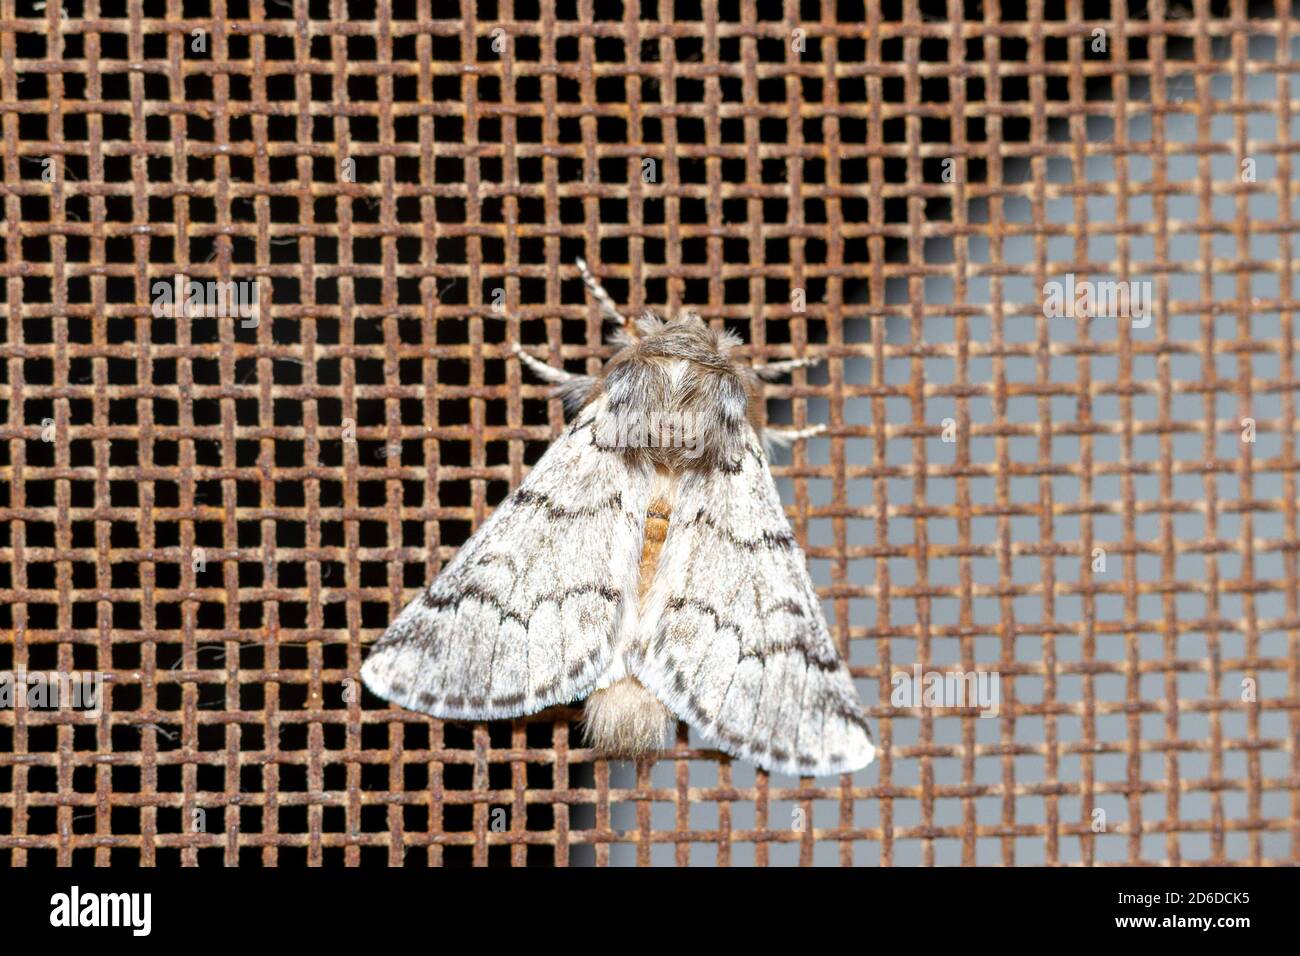 Garden moth perched on an iron mesh of a window Stock Photo